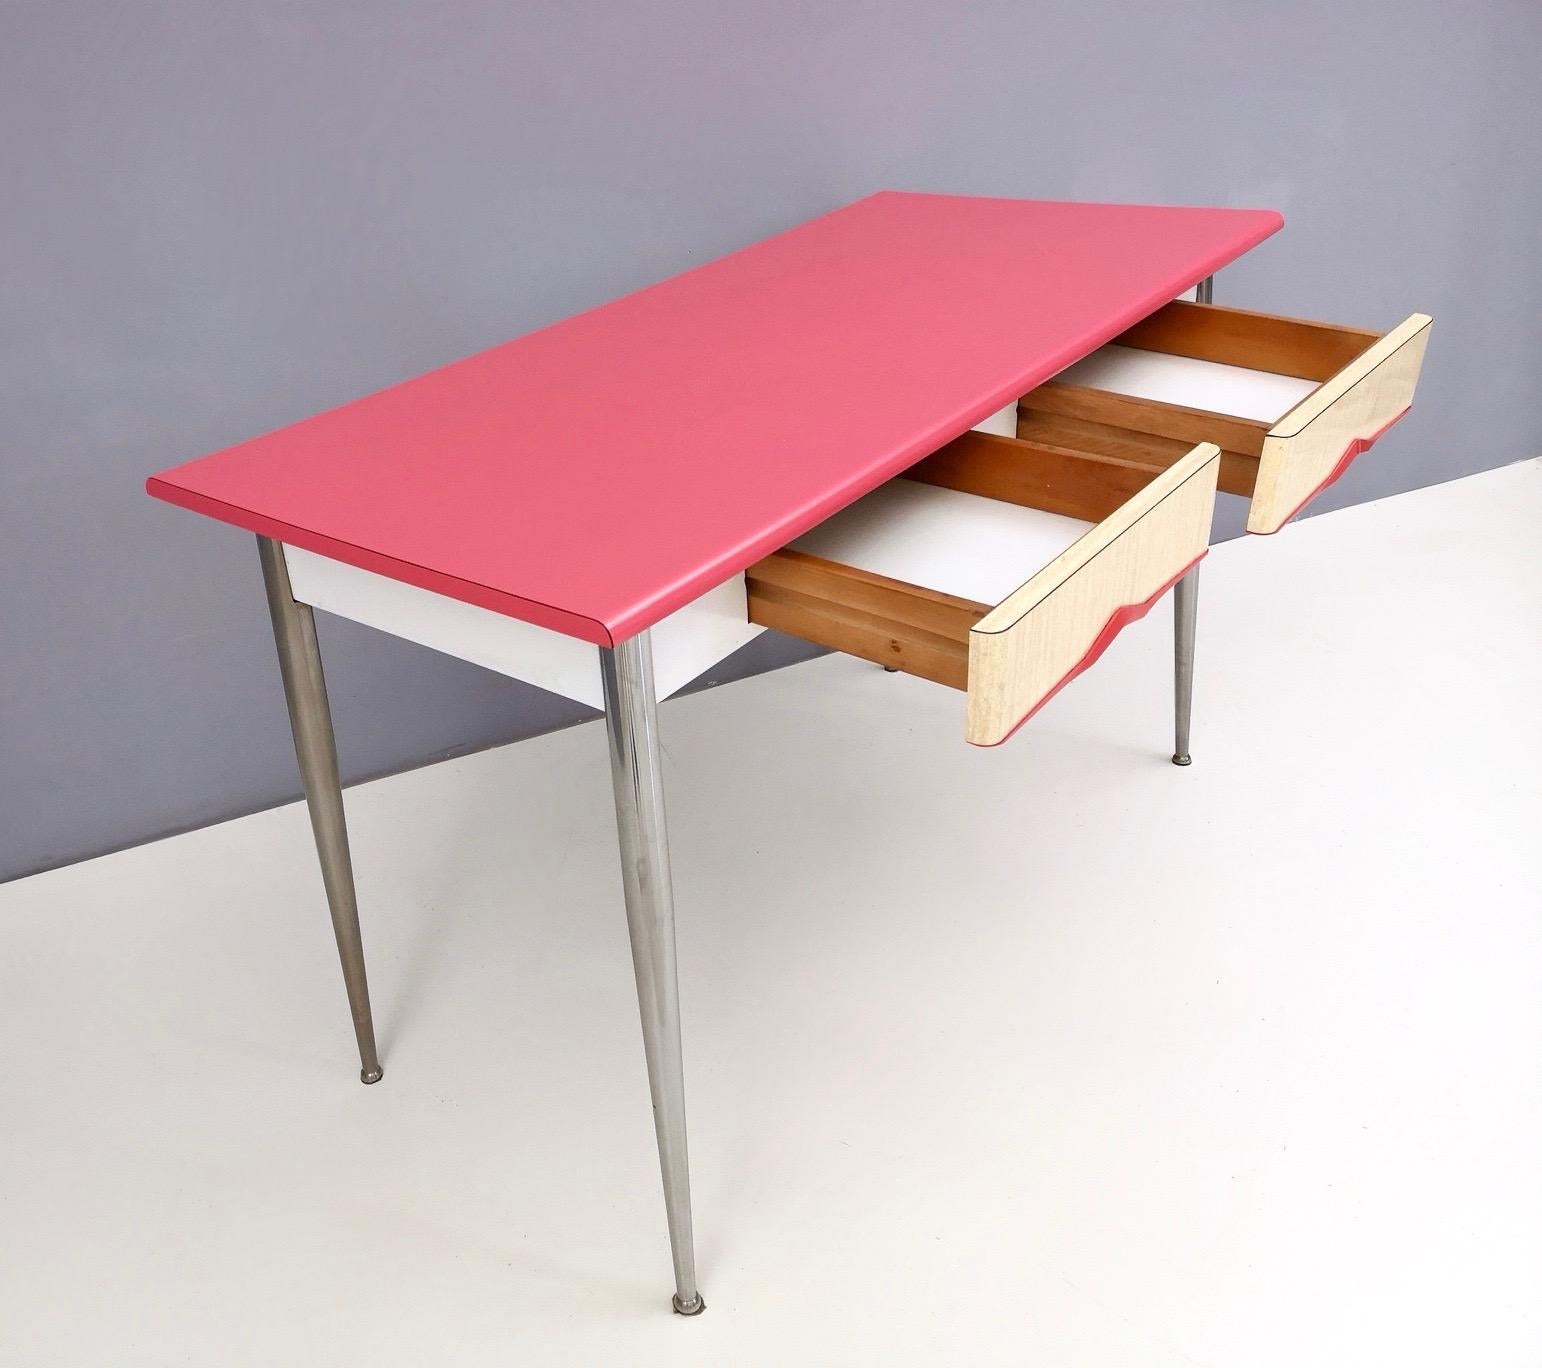 Plated Midcentury Dining Table with a Watermelon Pink Formica Top, Italy, 1950s